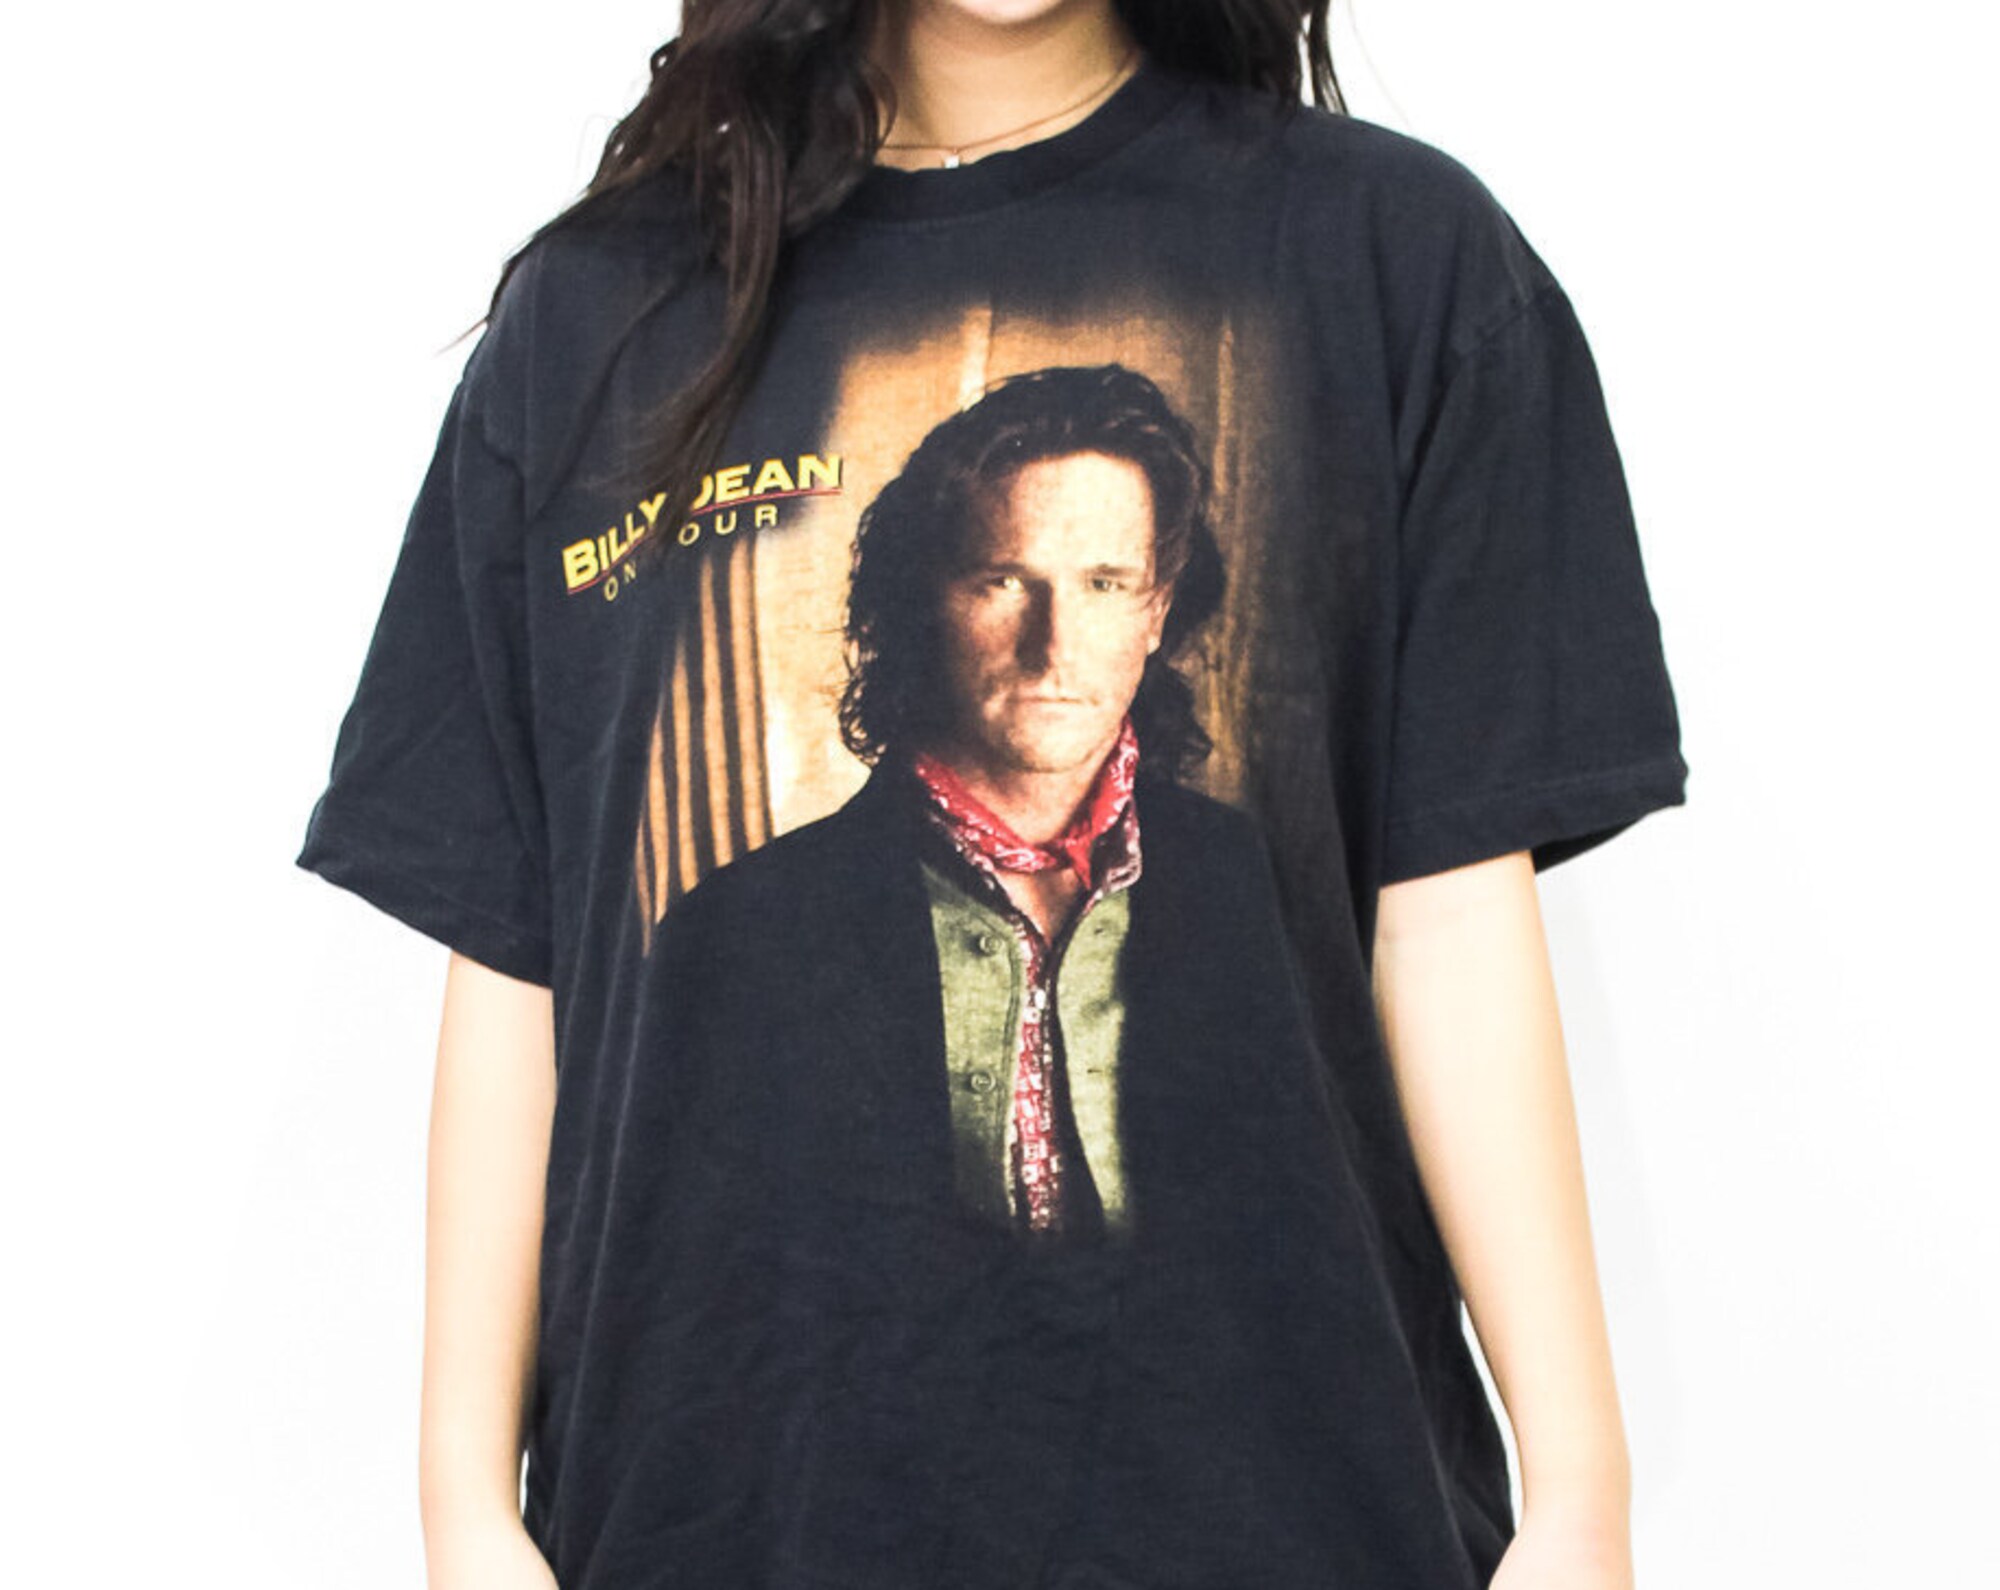 Discover Billy Dean 1996 Tour Tee